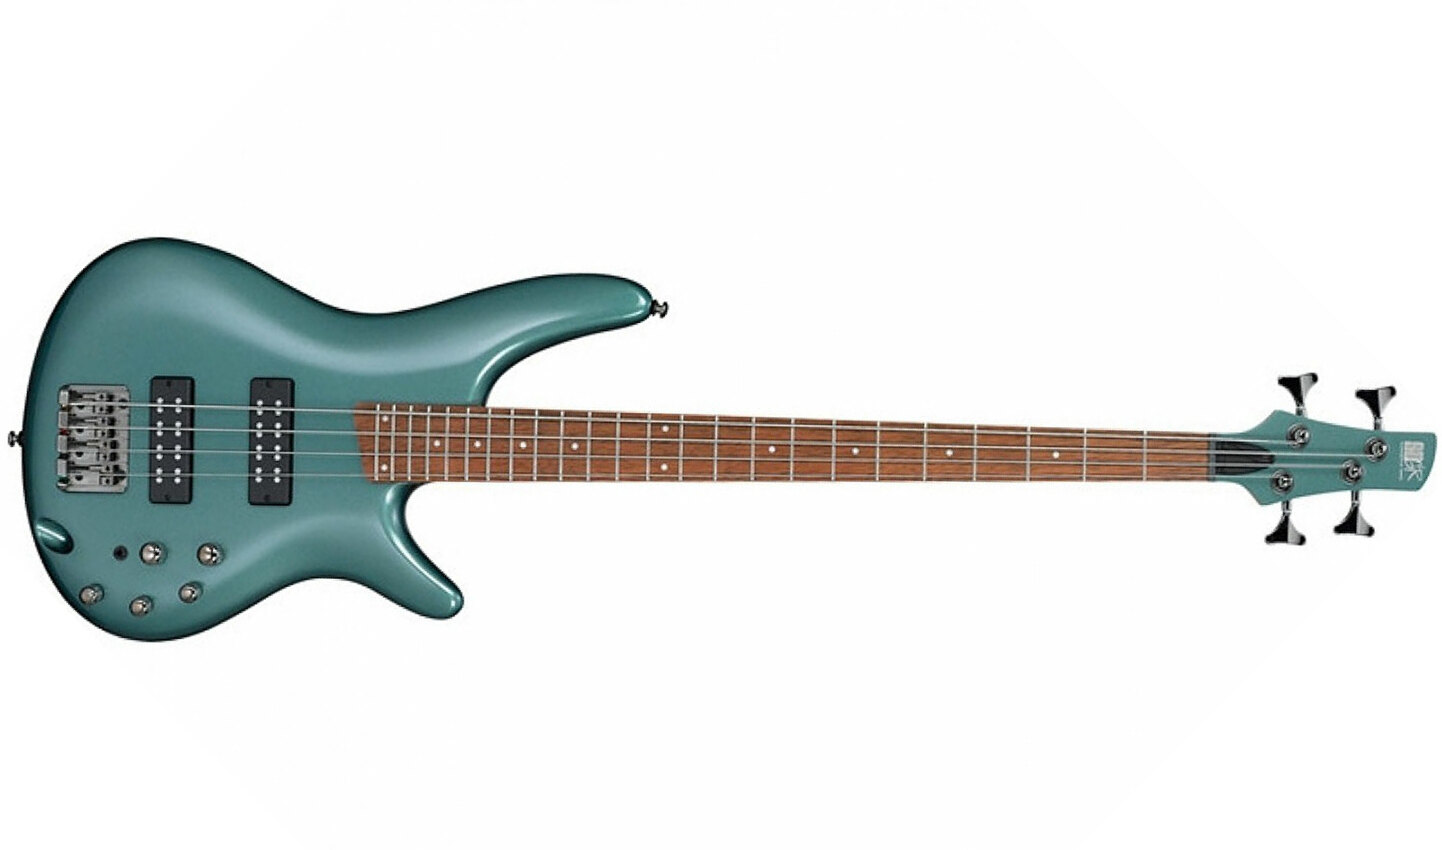 Ibanez Sr300e Msg Standard Active Jat - Metallic Sage Green - Solid body electric bass - Main picture